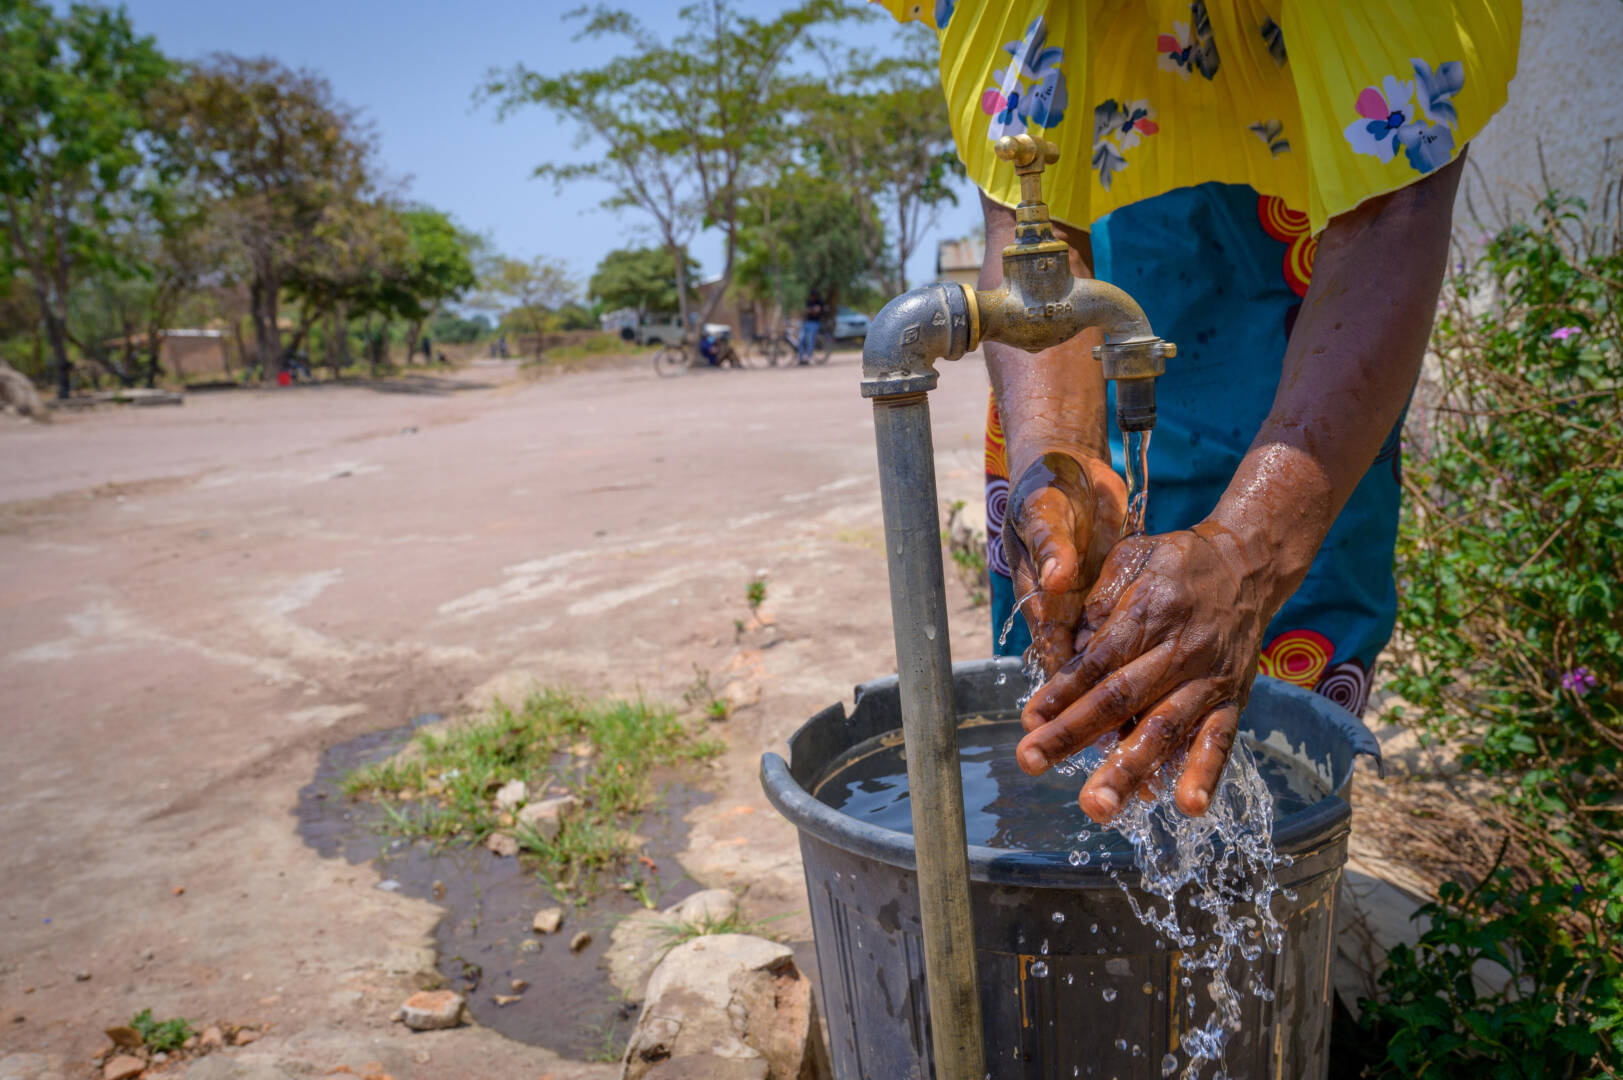 A woman rinsing her hands under a metal water tap. Water flows, splashing over a full bucket under the tap.